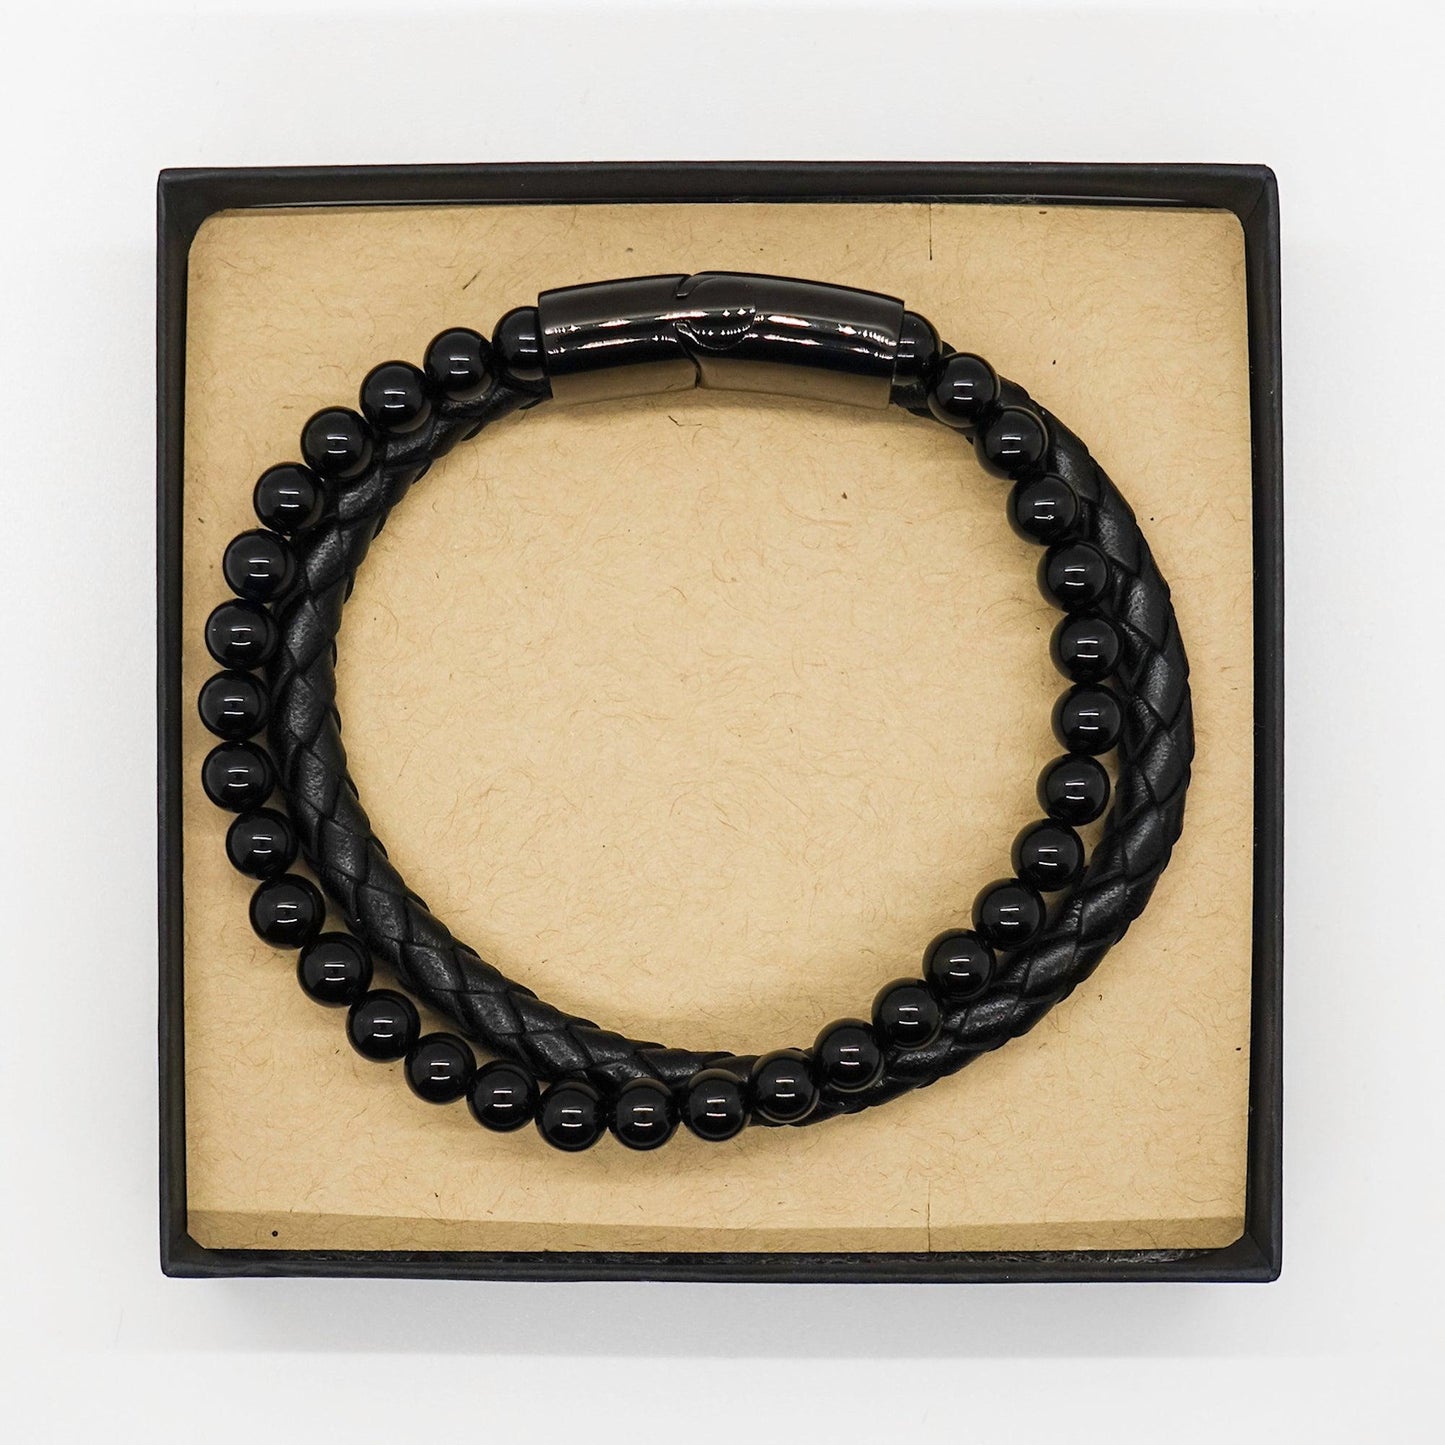 Loan Officer Black Braided Leather Stone Bracelet - Thanks for being who you are - Birthday Christmas Jewelry Gifts Coworkers Colleague Boss - Mallard Moon Gift Shop